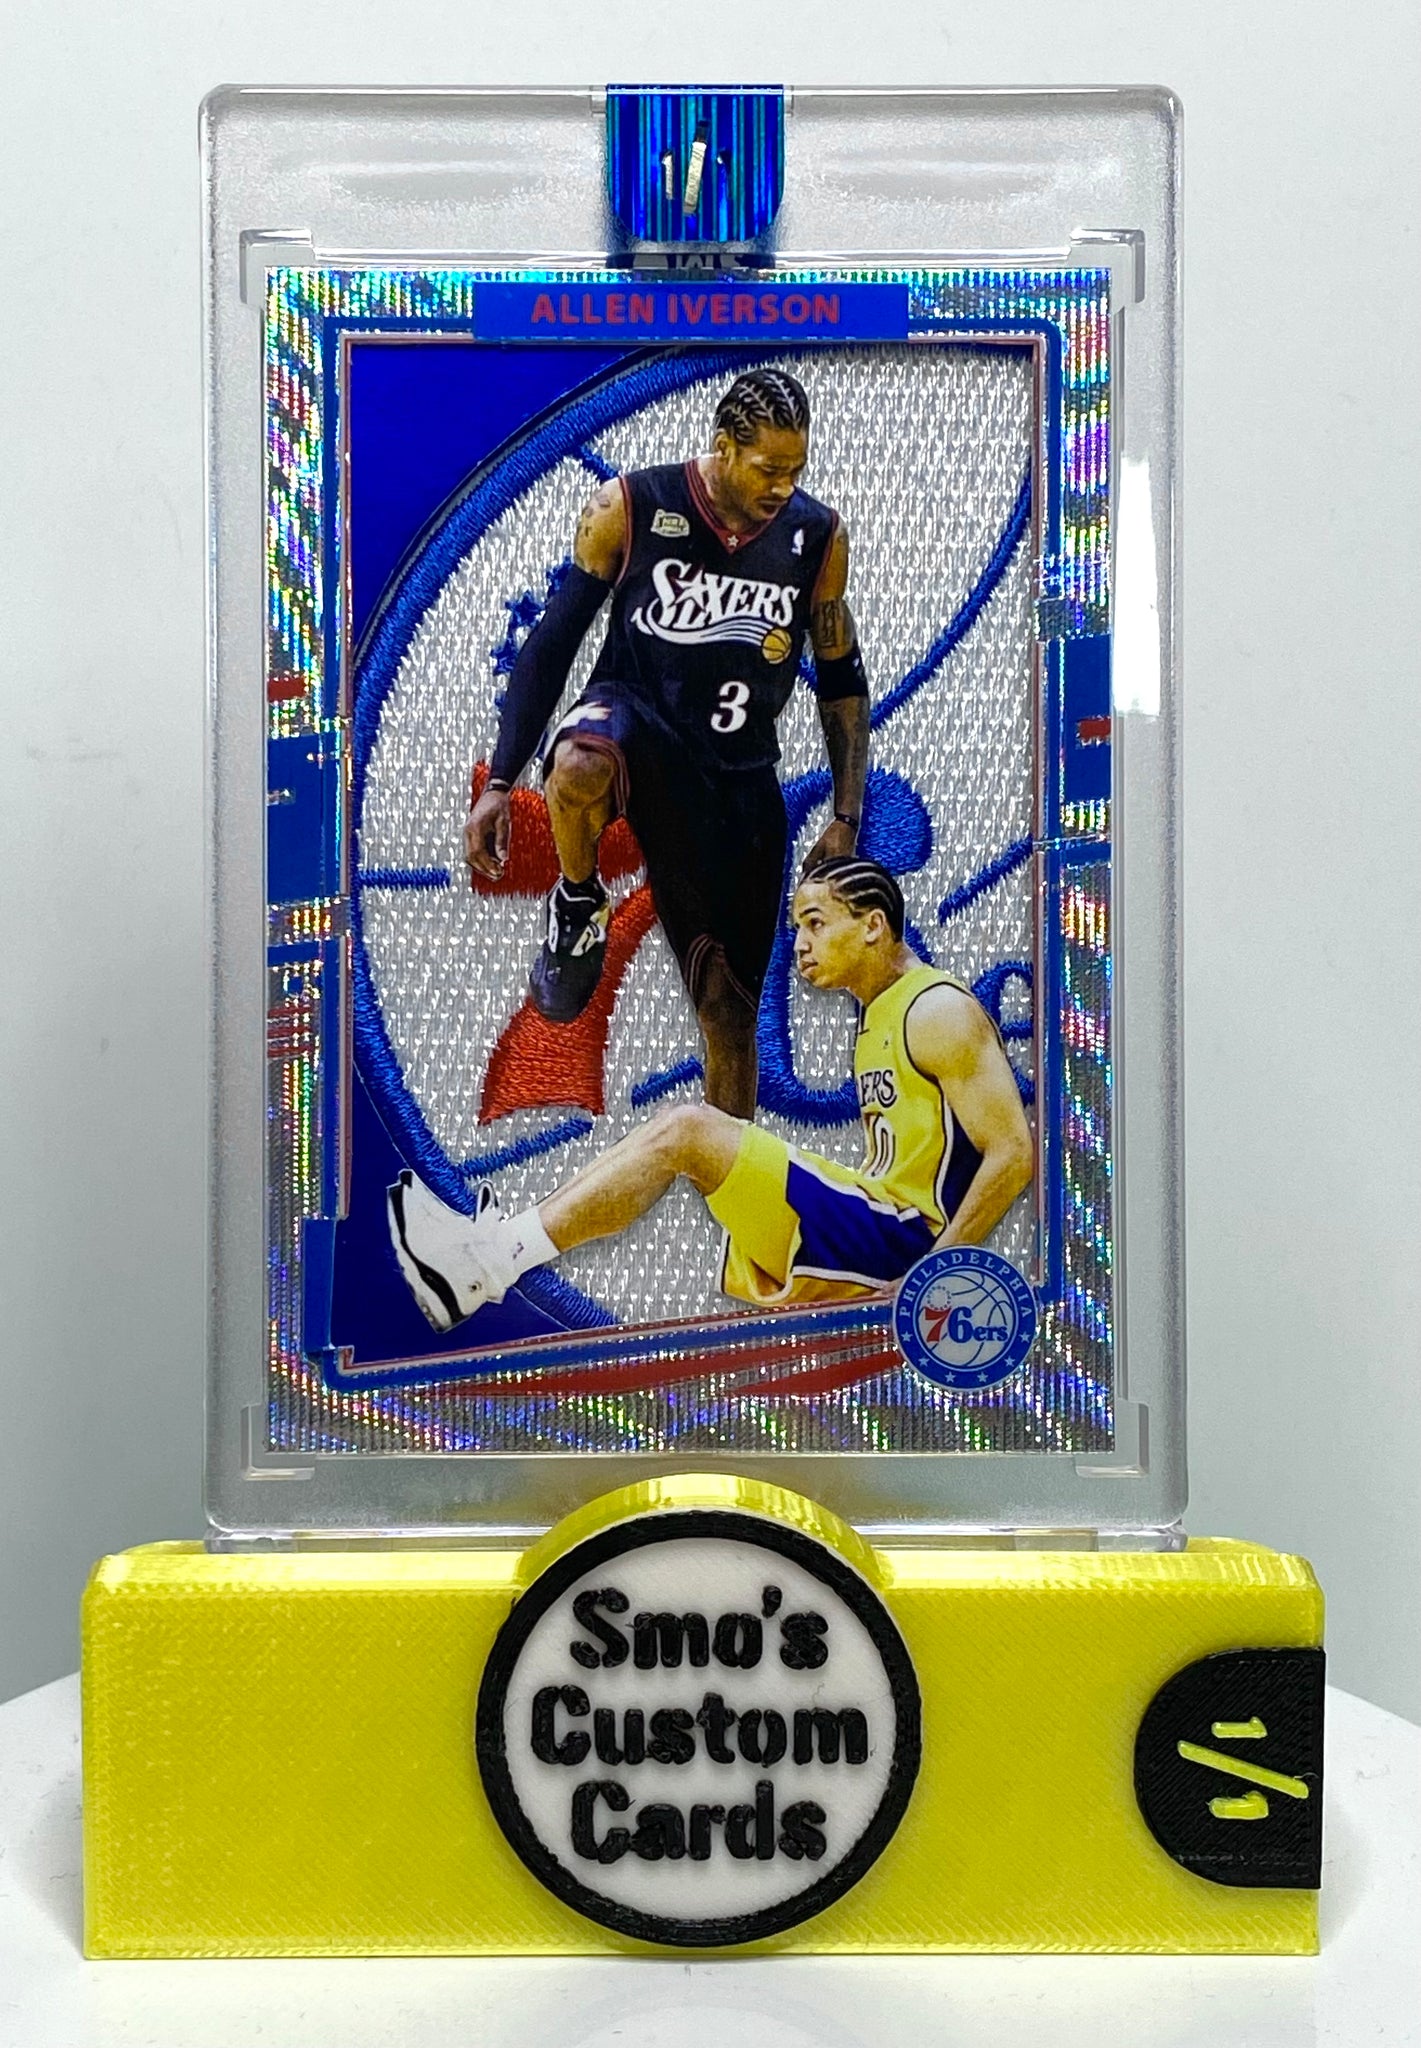 Allen Iverson “The Step Over” Optic Wave 76ers Patch 1/1